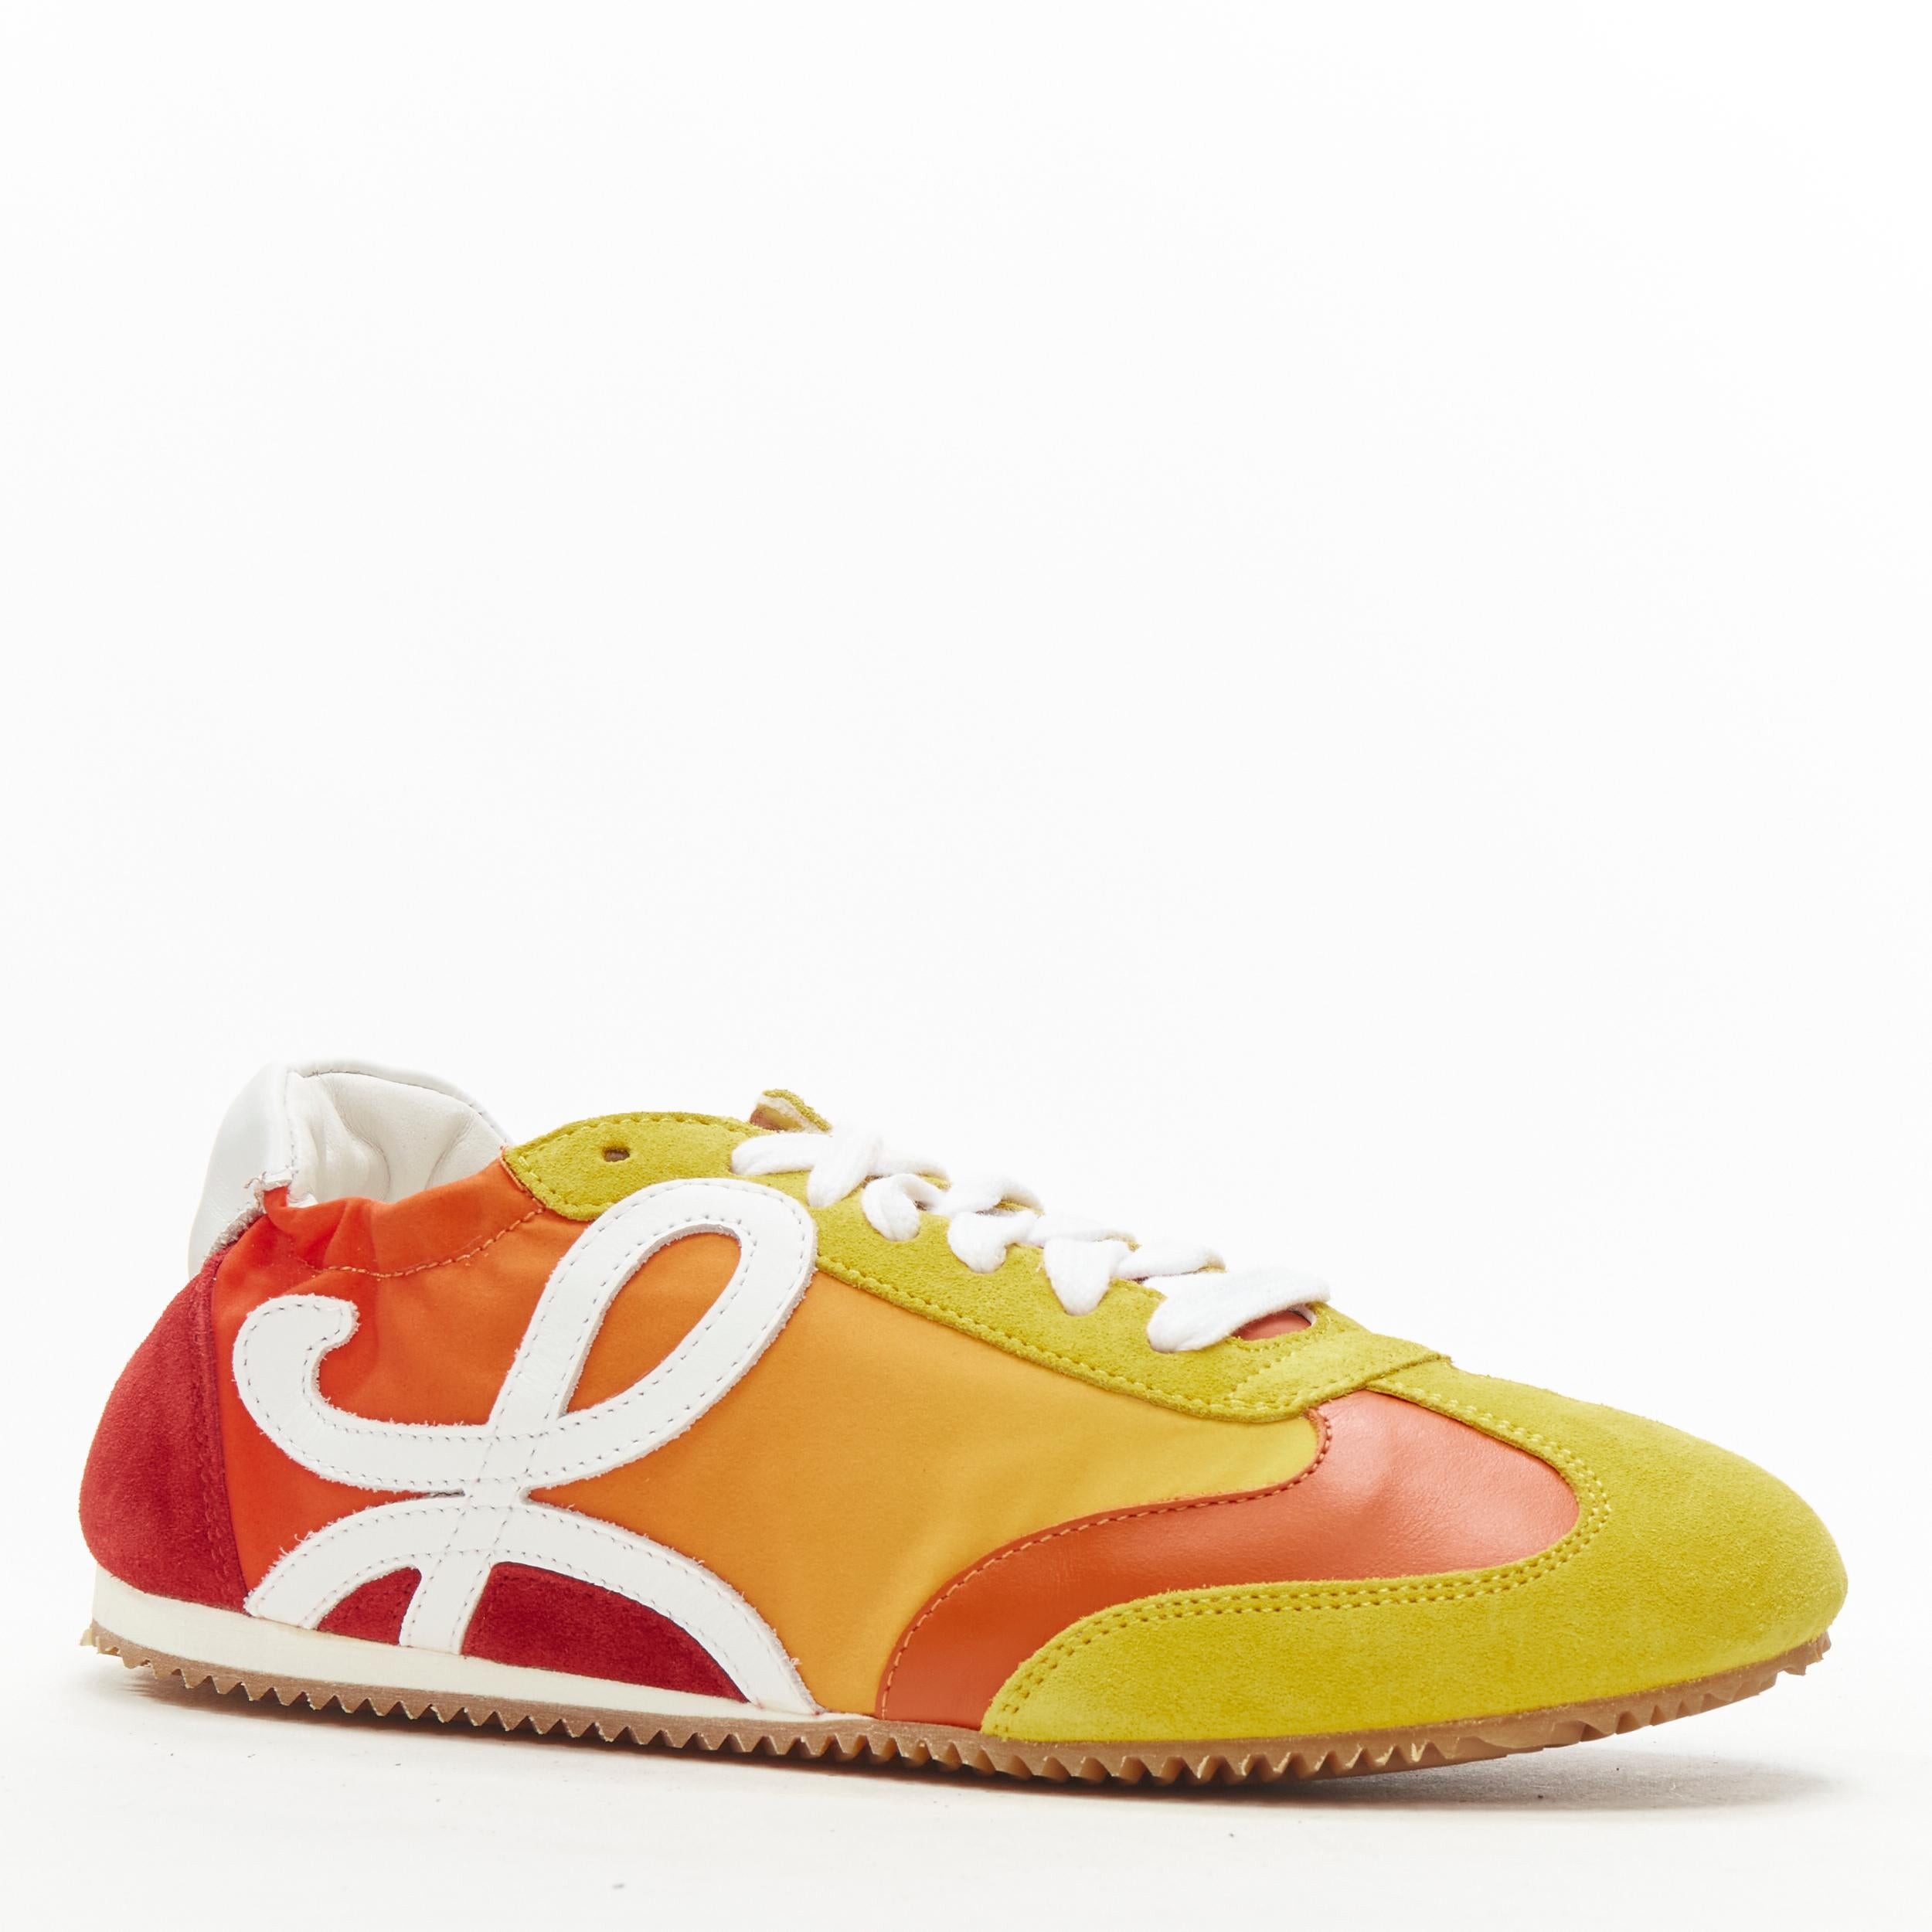 rare LOEWE Flow sunset red yellow gradient low top runner sneaker EU37 
Reference: ANWU/A00323 
Brand: Loewe 
Designer: JW Anderson 
Model: Flow 
Material: Fabric 
Color: Orange 
Closure: Lace 
Extra Detail: Suede and leather trim. Fabric body.